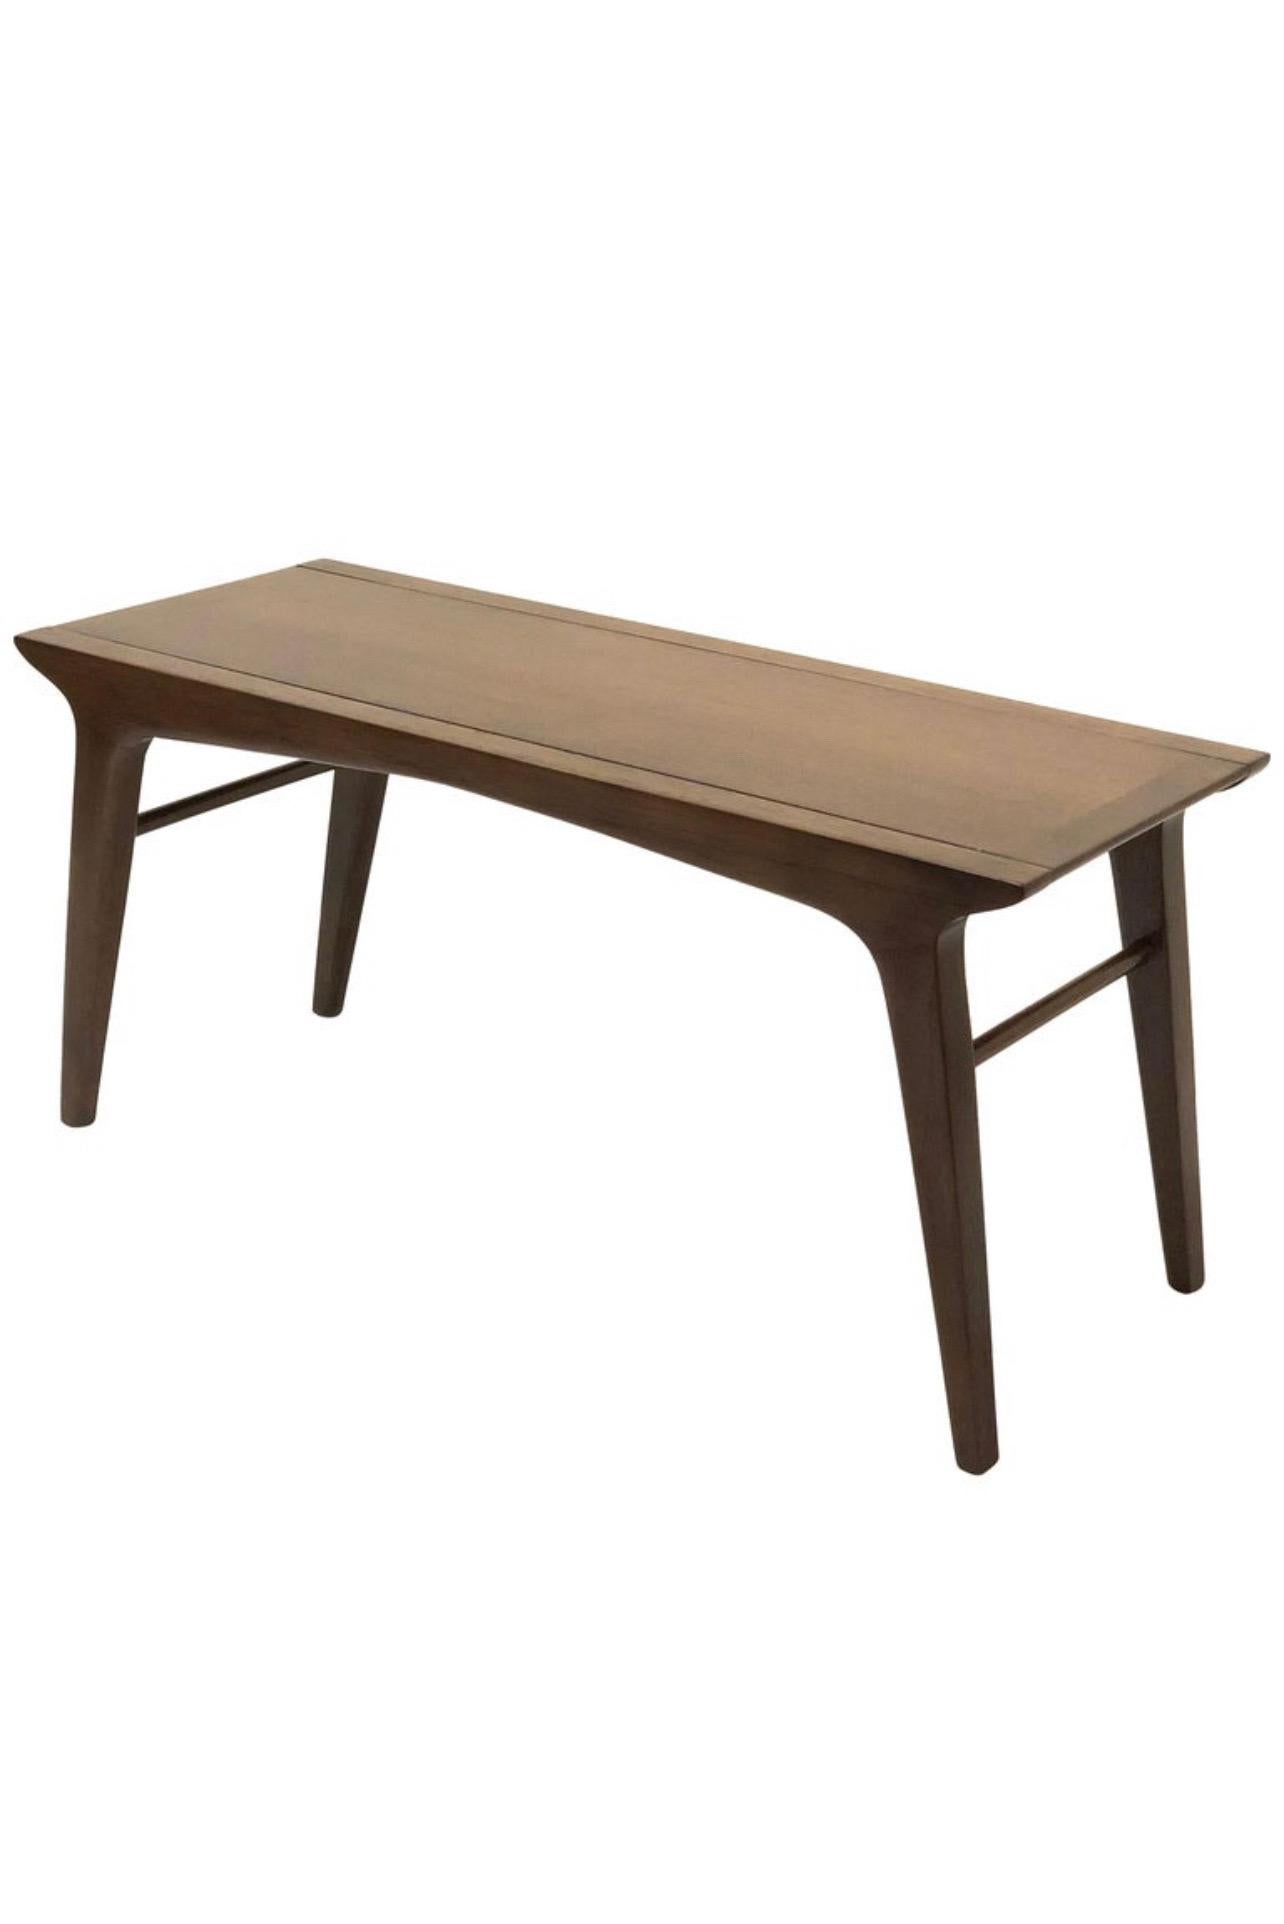 Modernist bench or table by John Van Koert for Drexel, superior quality and construction. Scaled down version of the Classic dining table, simple, elegant design. solid and sturdy freshly refinished in a dark walnut stain.